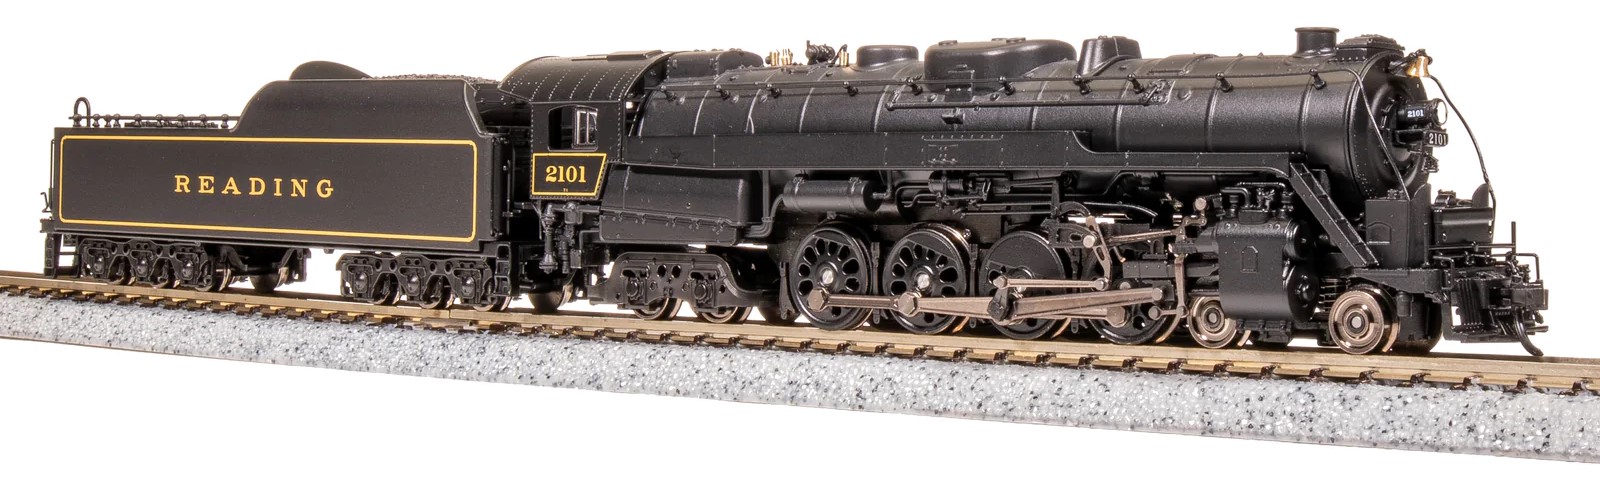 Broadway Limited Imports N 7401 Reading Class T-1 4-8-4 Locomotive Paragon4 Sound/DC/DCC/Smoke 'In Service Version' RDG #2108